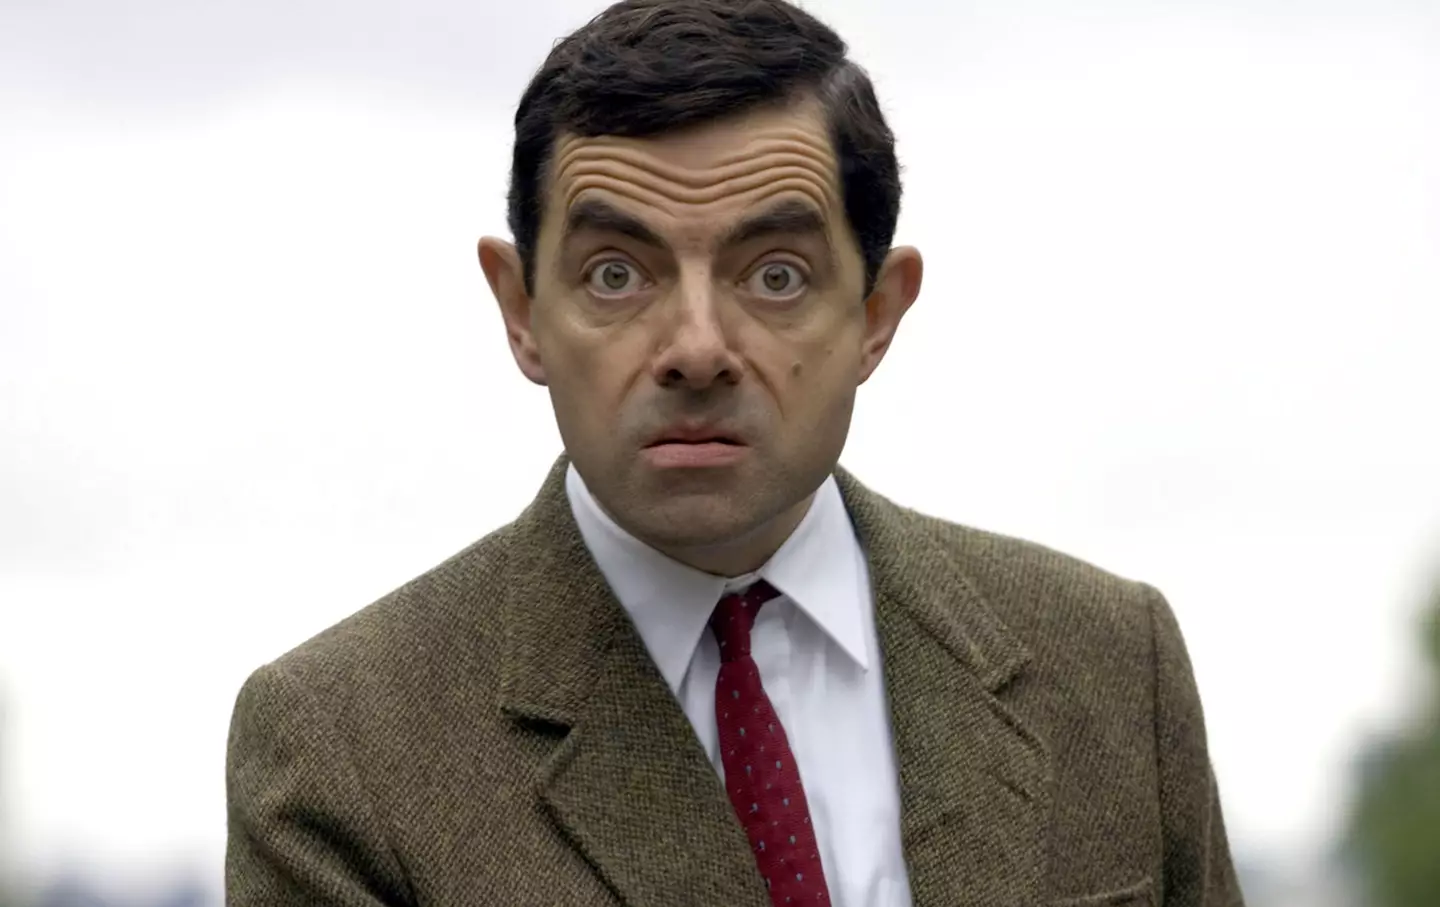 Gamers flooded to social media in stitches over how much Dobby looks like Mr Bean.